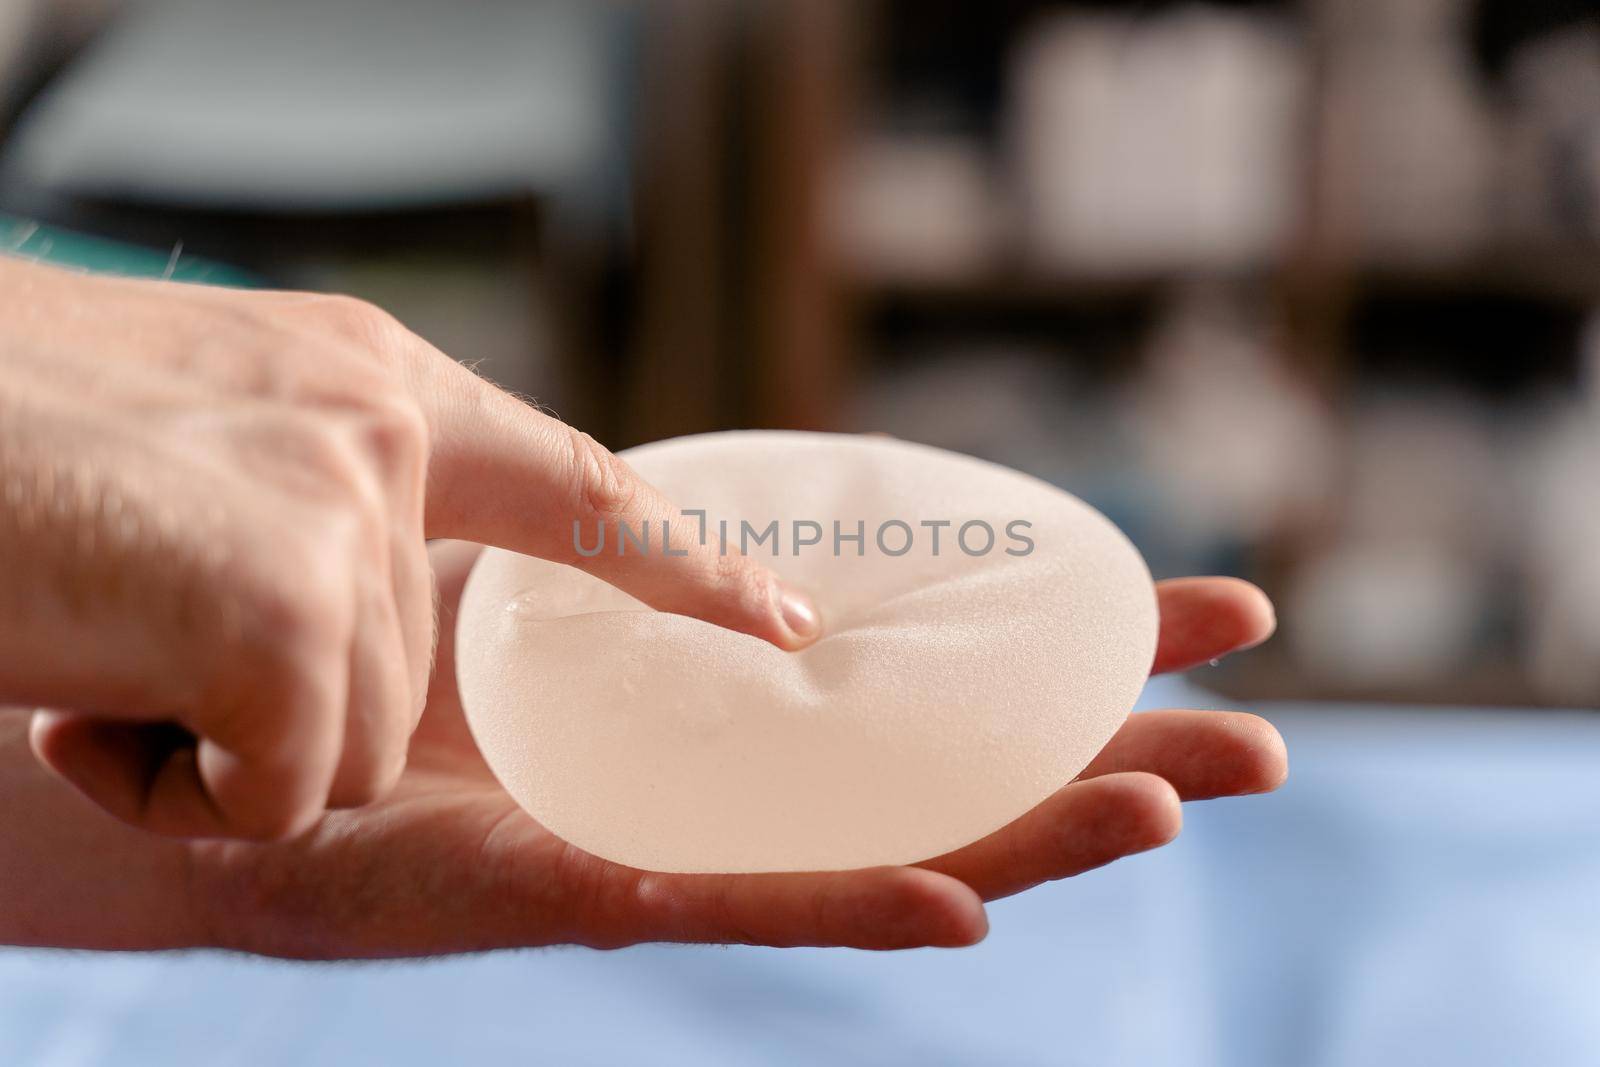 Silicone implant in hand close-up. Breast augmentation and lift surgery by Rabizo